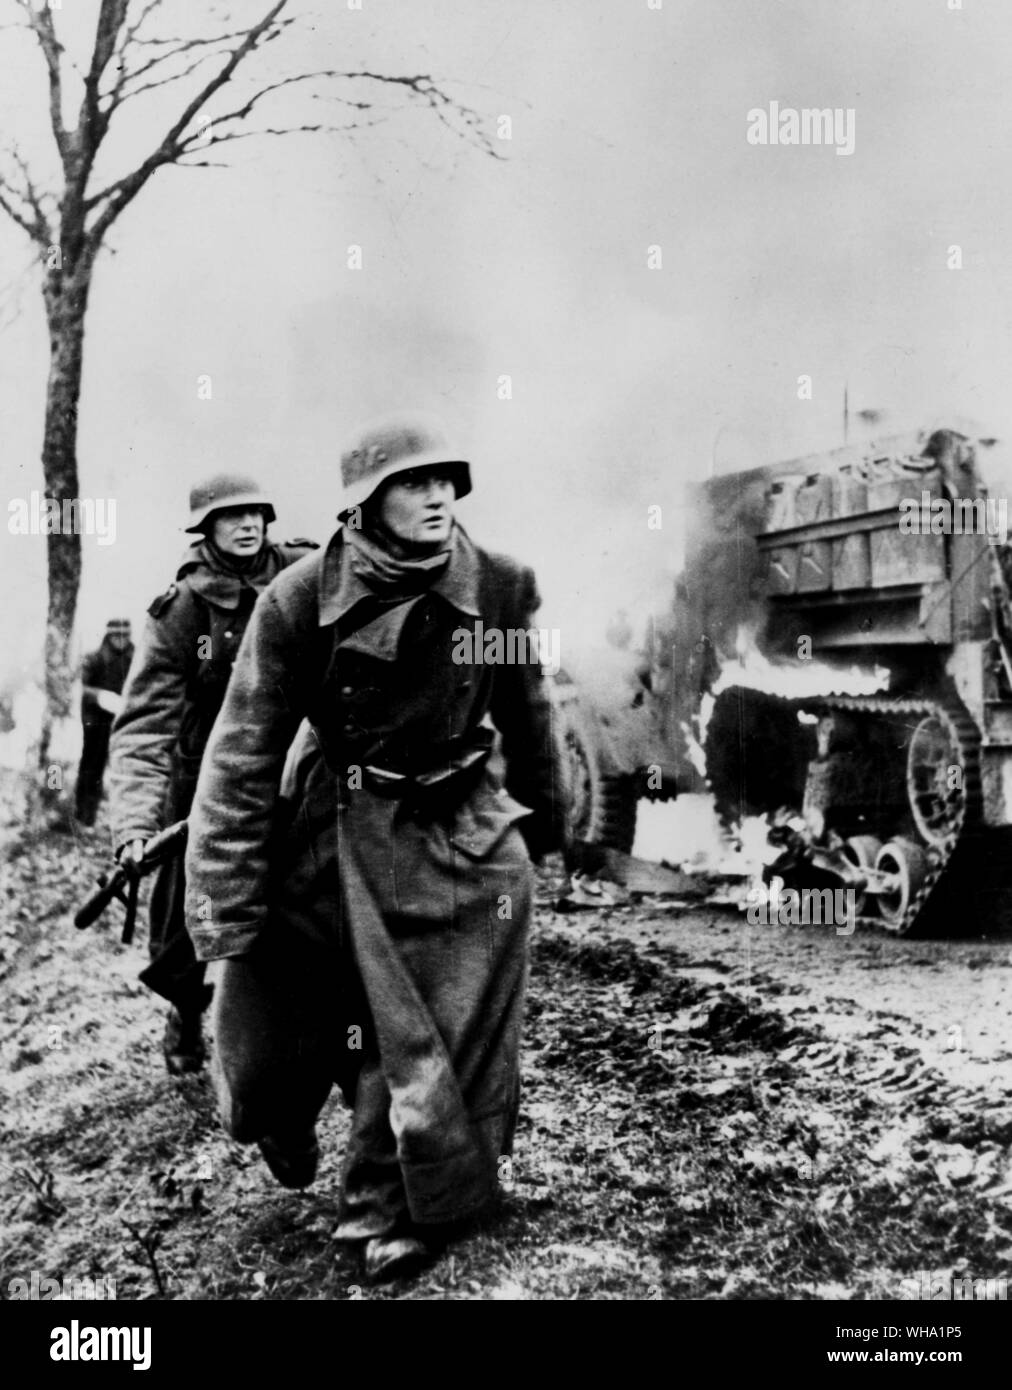 WW2: German troops bypass burning American half-track vehicle. Dec. 1944 - Jan.1945. Ardennes campaign. Stock Photo